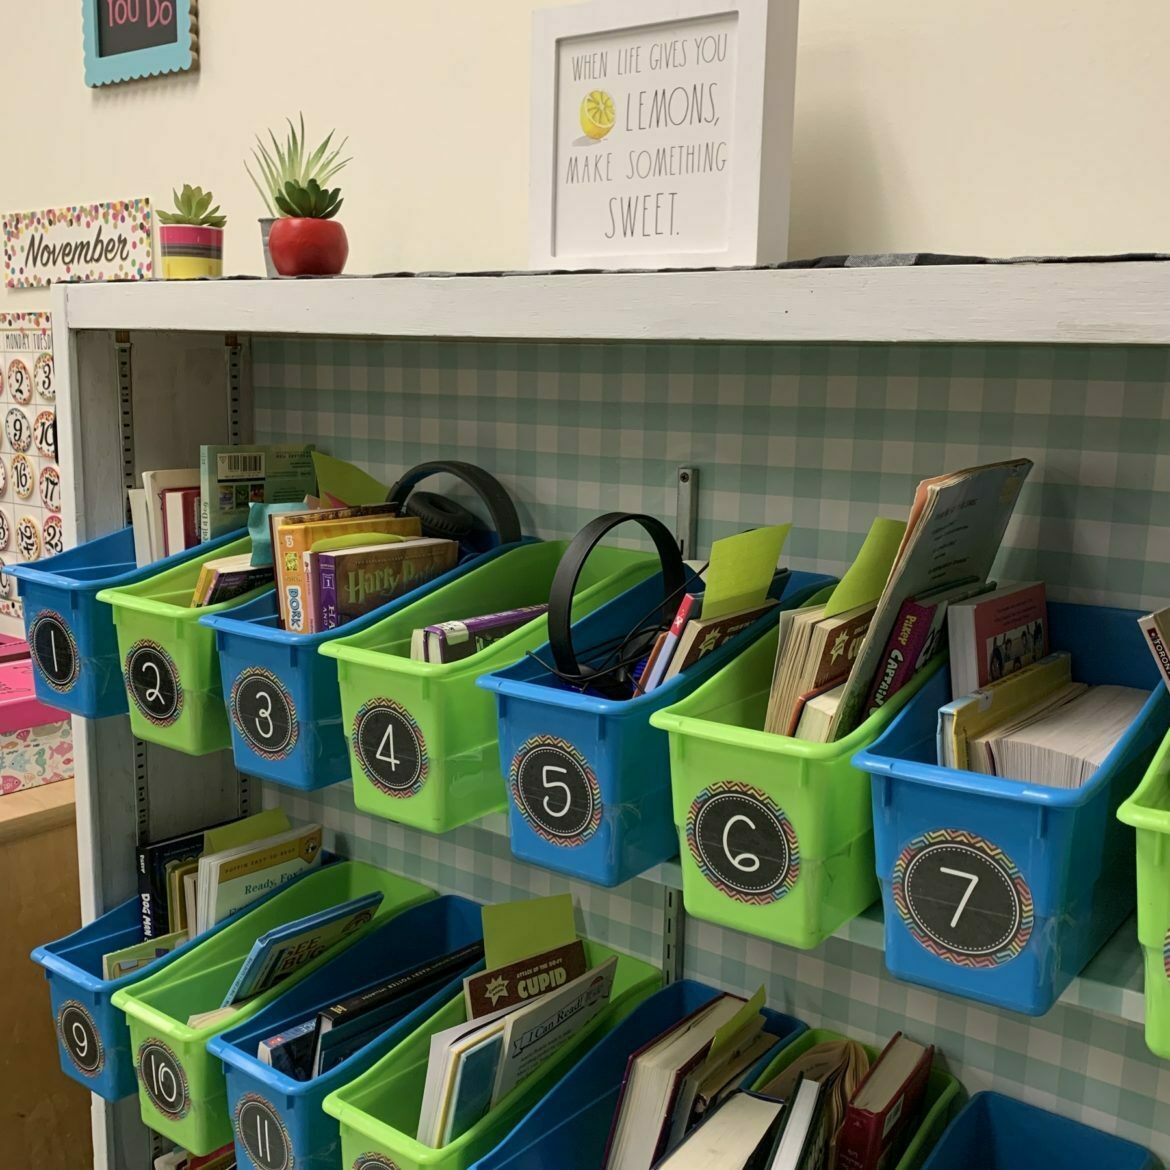 Bookshelf with blue checkered shelf liner on the shelves and numbered bins with books